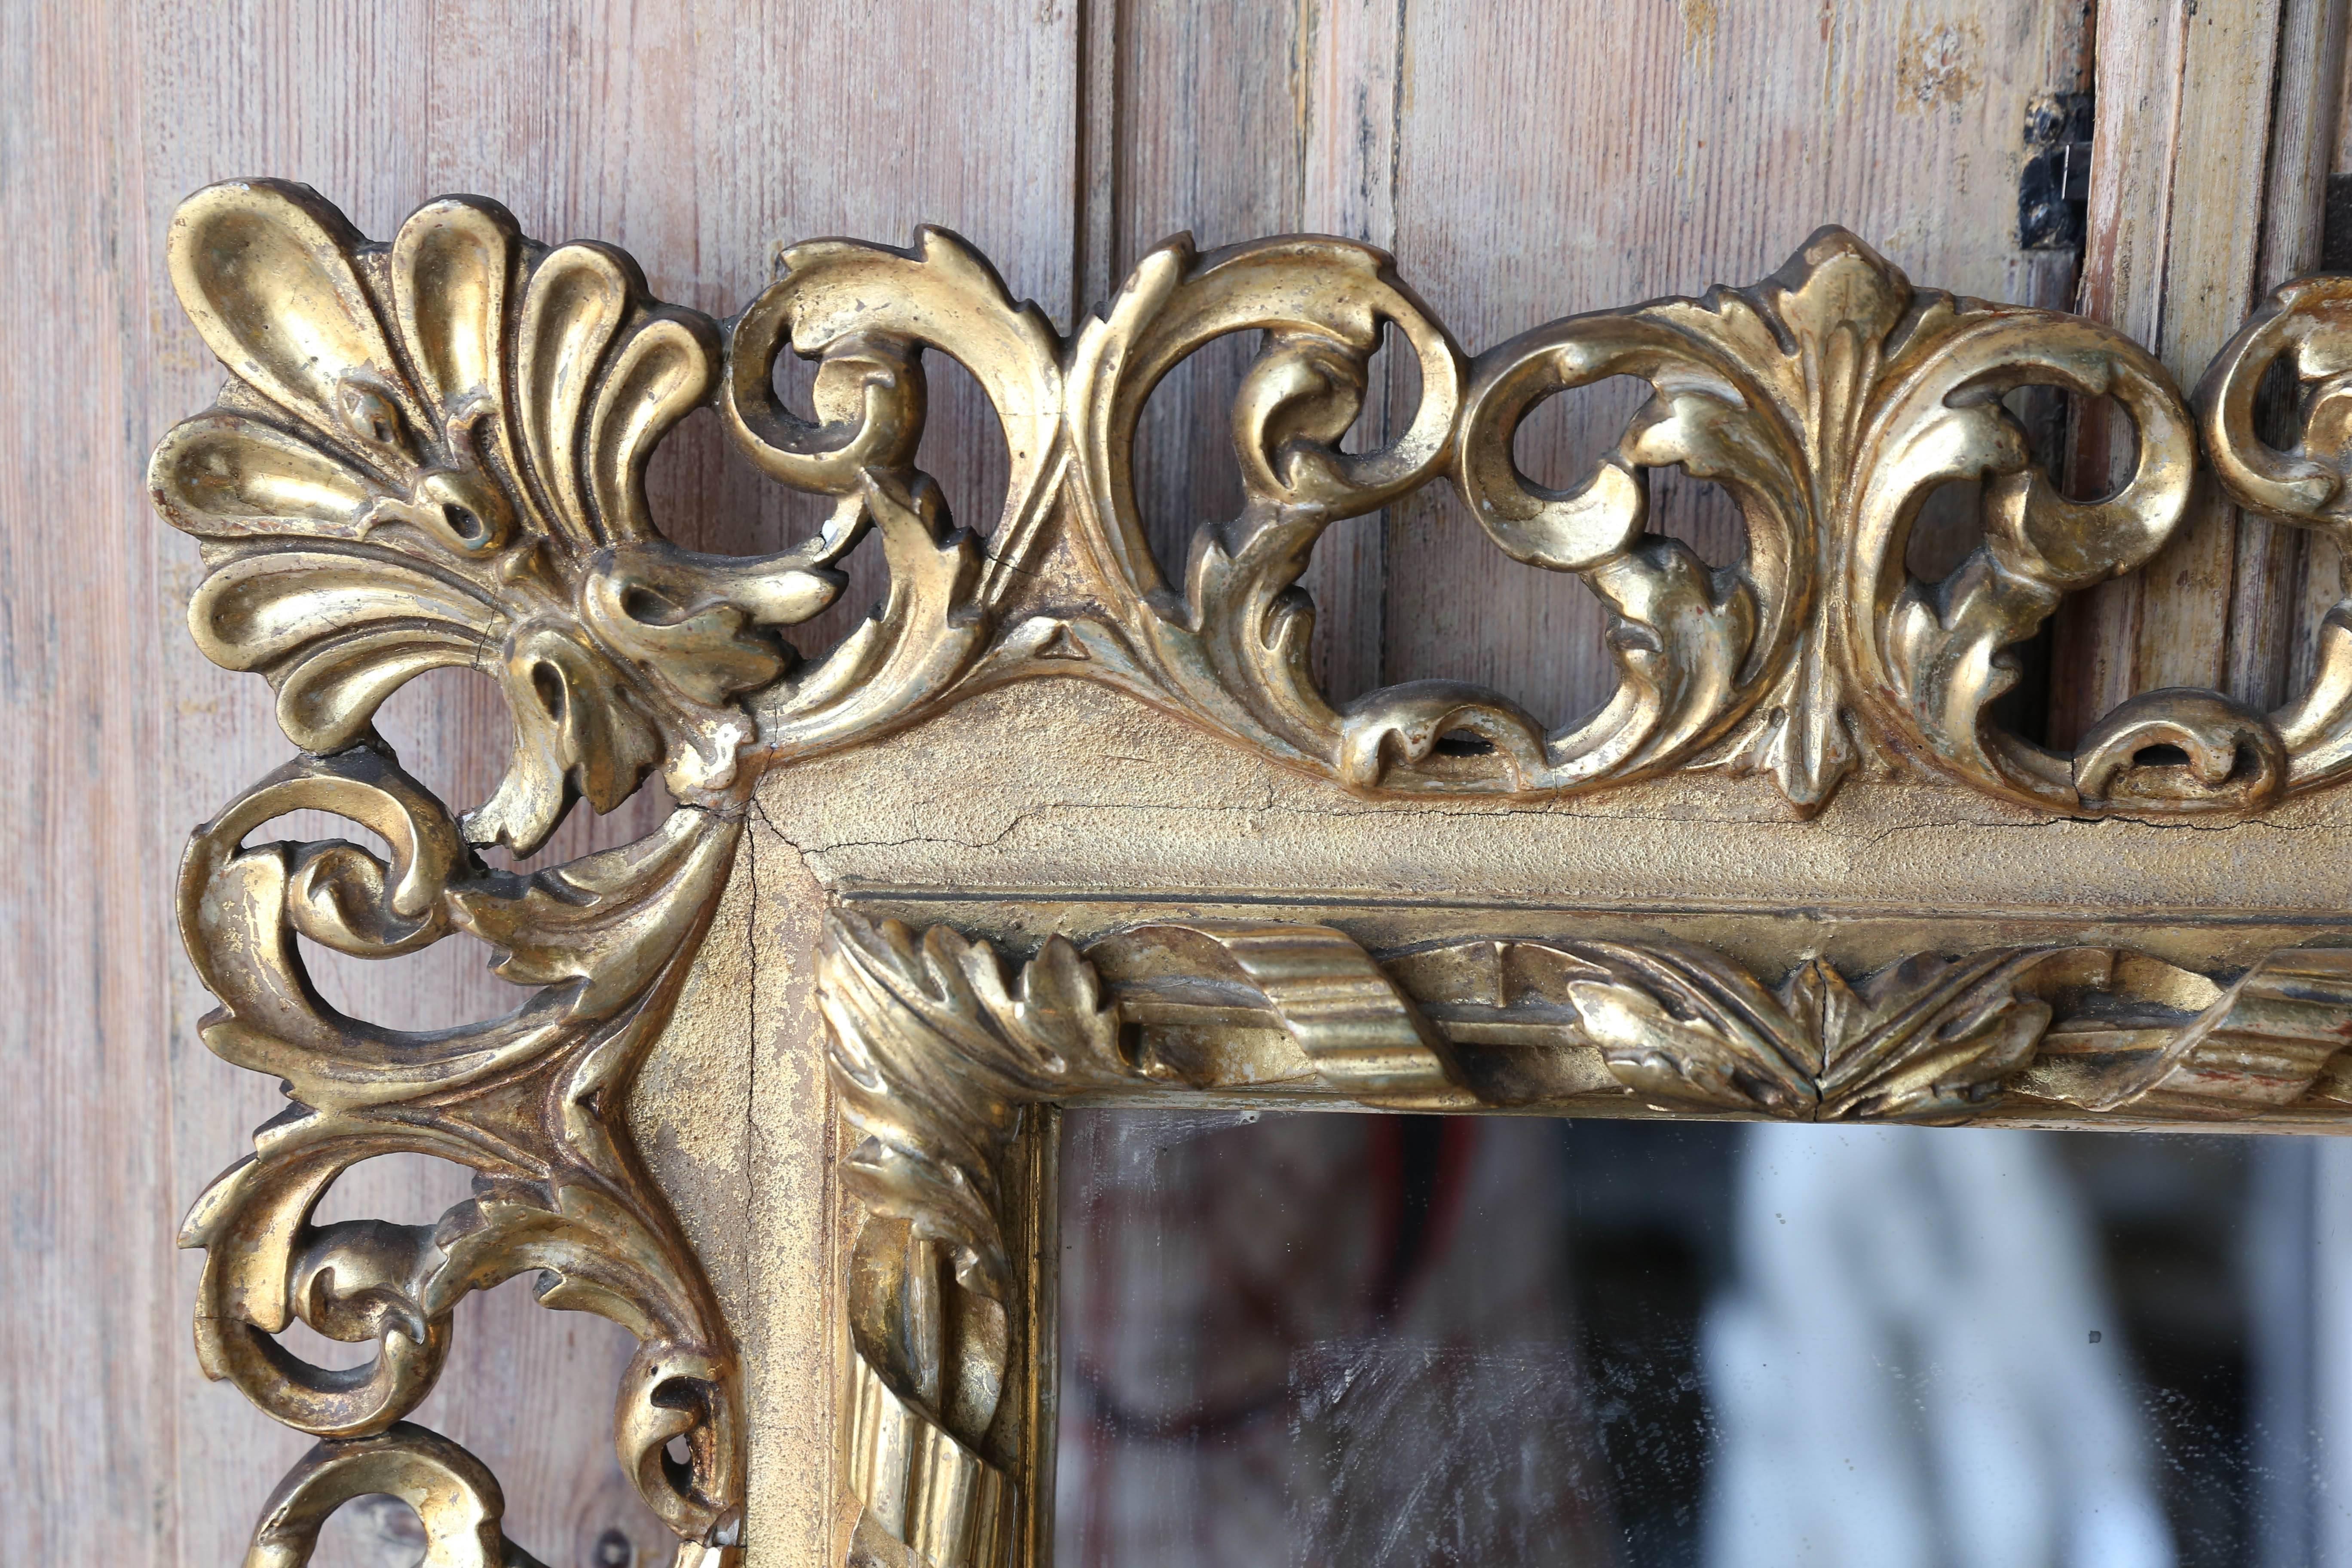 This beautifully carved Italian gold gilt small collectors mirror has such wonderful curves and personality.